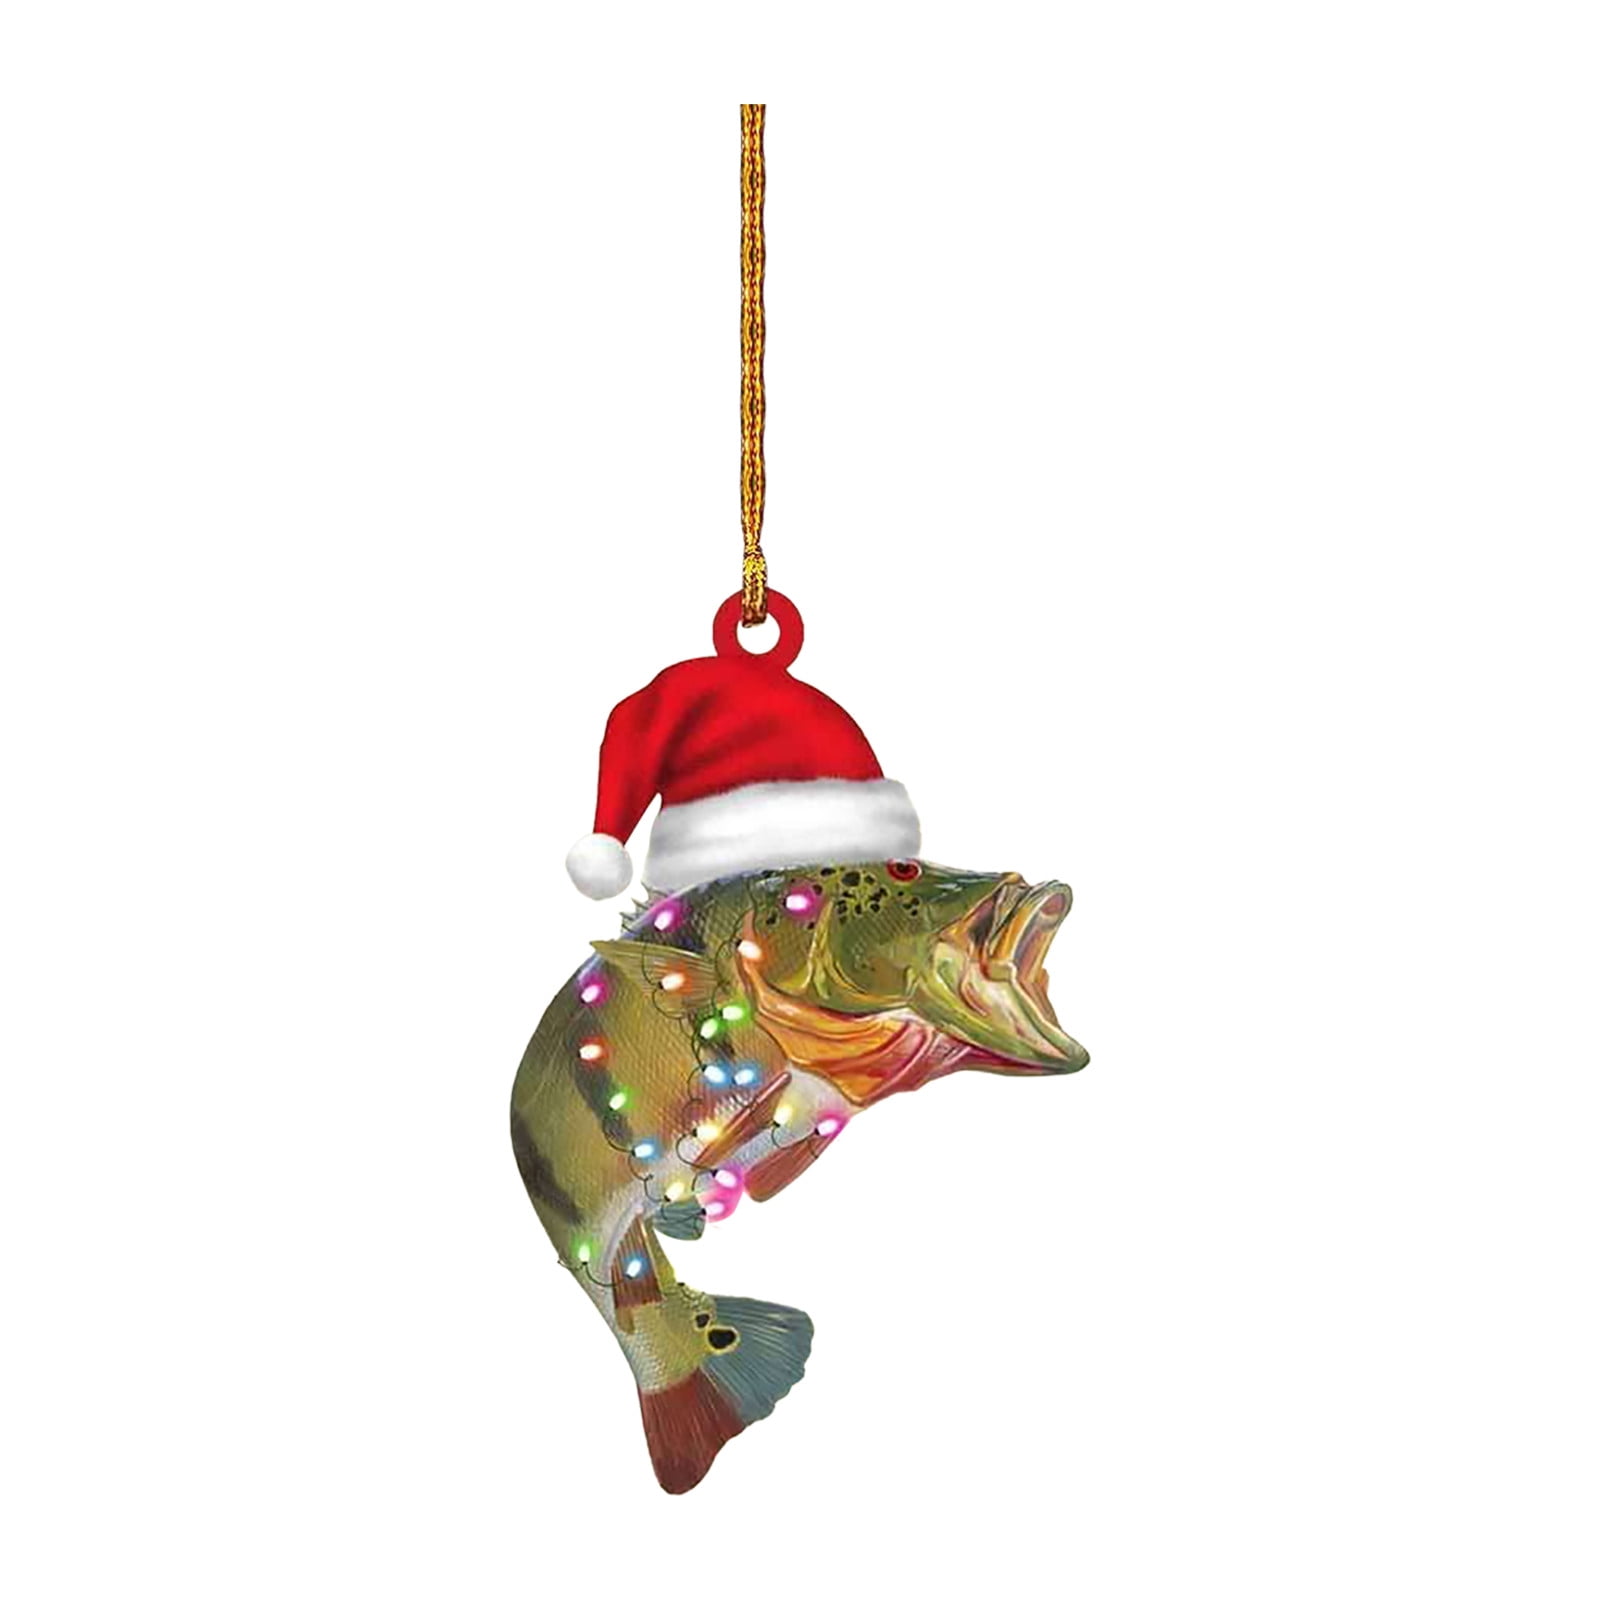 Stain Glass Window Kits for Adults Personalized Green Bass Fish Largemouth  Flat 2D Christmas Ornaments Tree Decorations Stain Glass Bath Mom Ornament  Hummingbird Ball Ornament Set Giveaway of The Day 